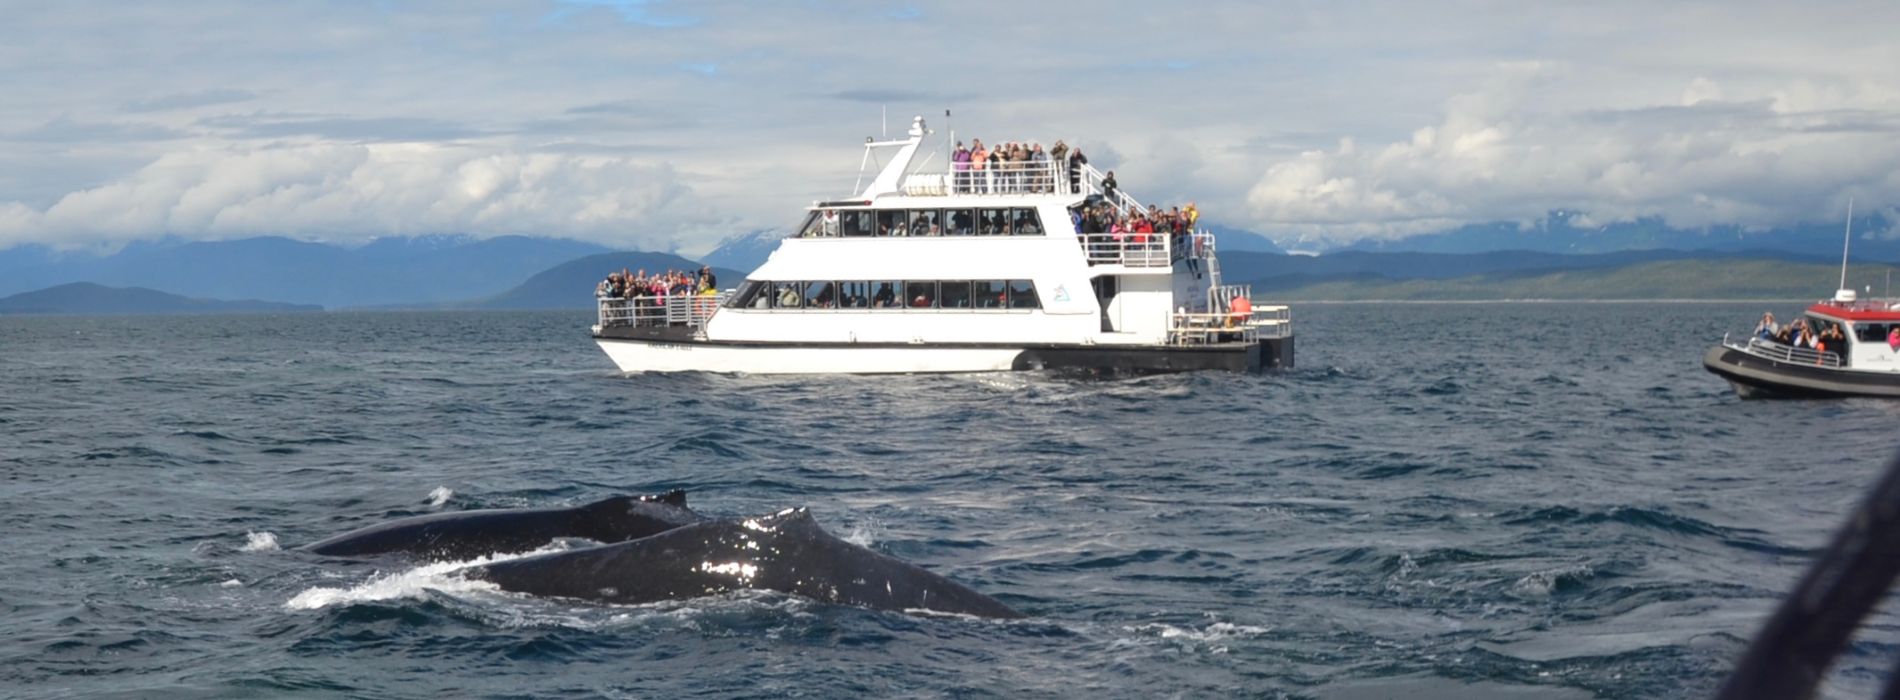 Best-whale-watching-tour